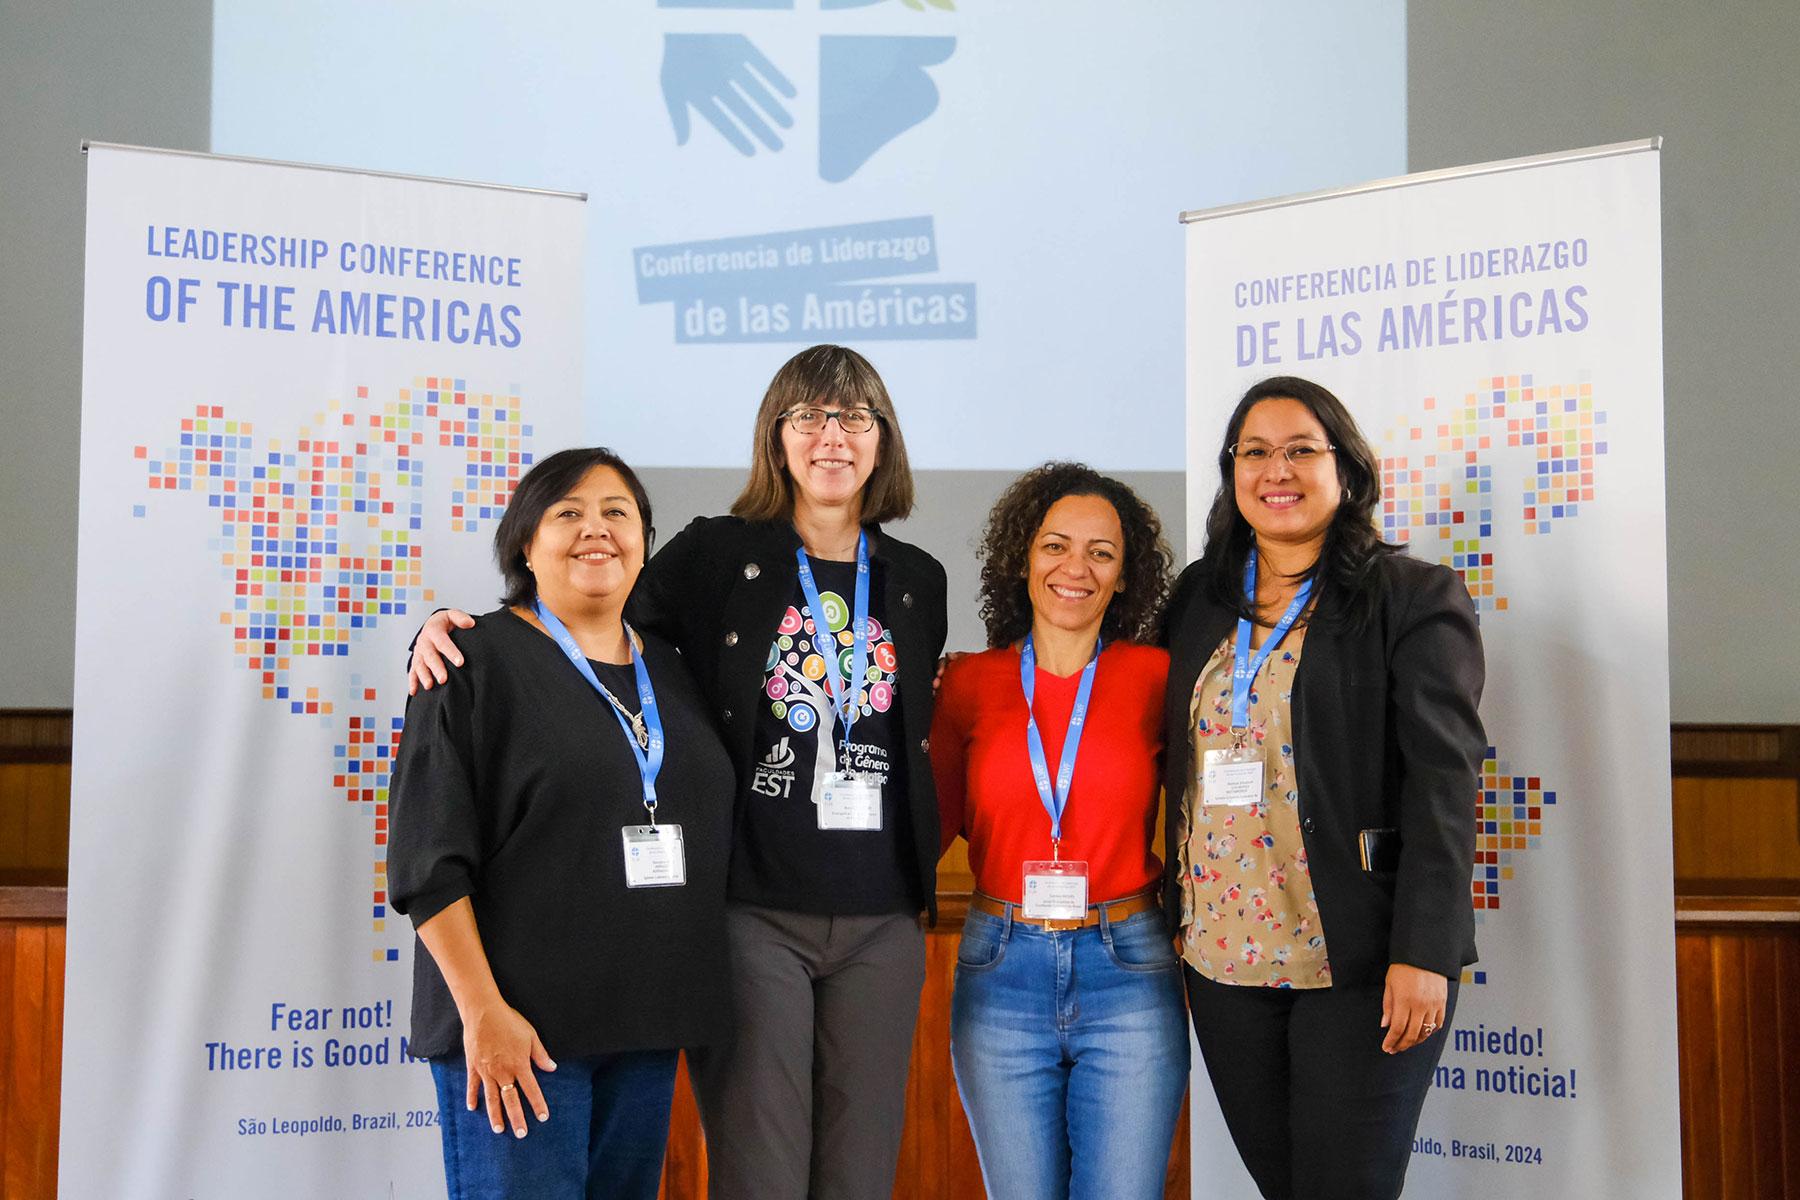 The coordinators of the women’s networks in the Americas are (from left) Georgina Arriagada Adriazola (Evangelical Lutheran Church in Chile - ILCH), Mary Streufert (Evangelical Lutheran Church in America - ELCA), Carmen Michel (Evangelical Church of the Lutheran Confession in Brazil - IECLB), and Adriana Alvaro (Salvadoran Lutheran Church - ILS). Photo: LWF/Gabriela Giese